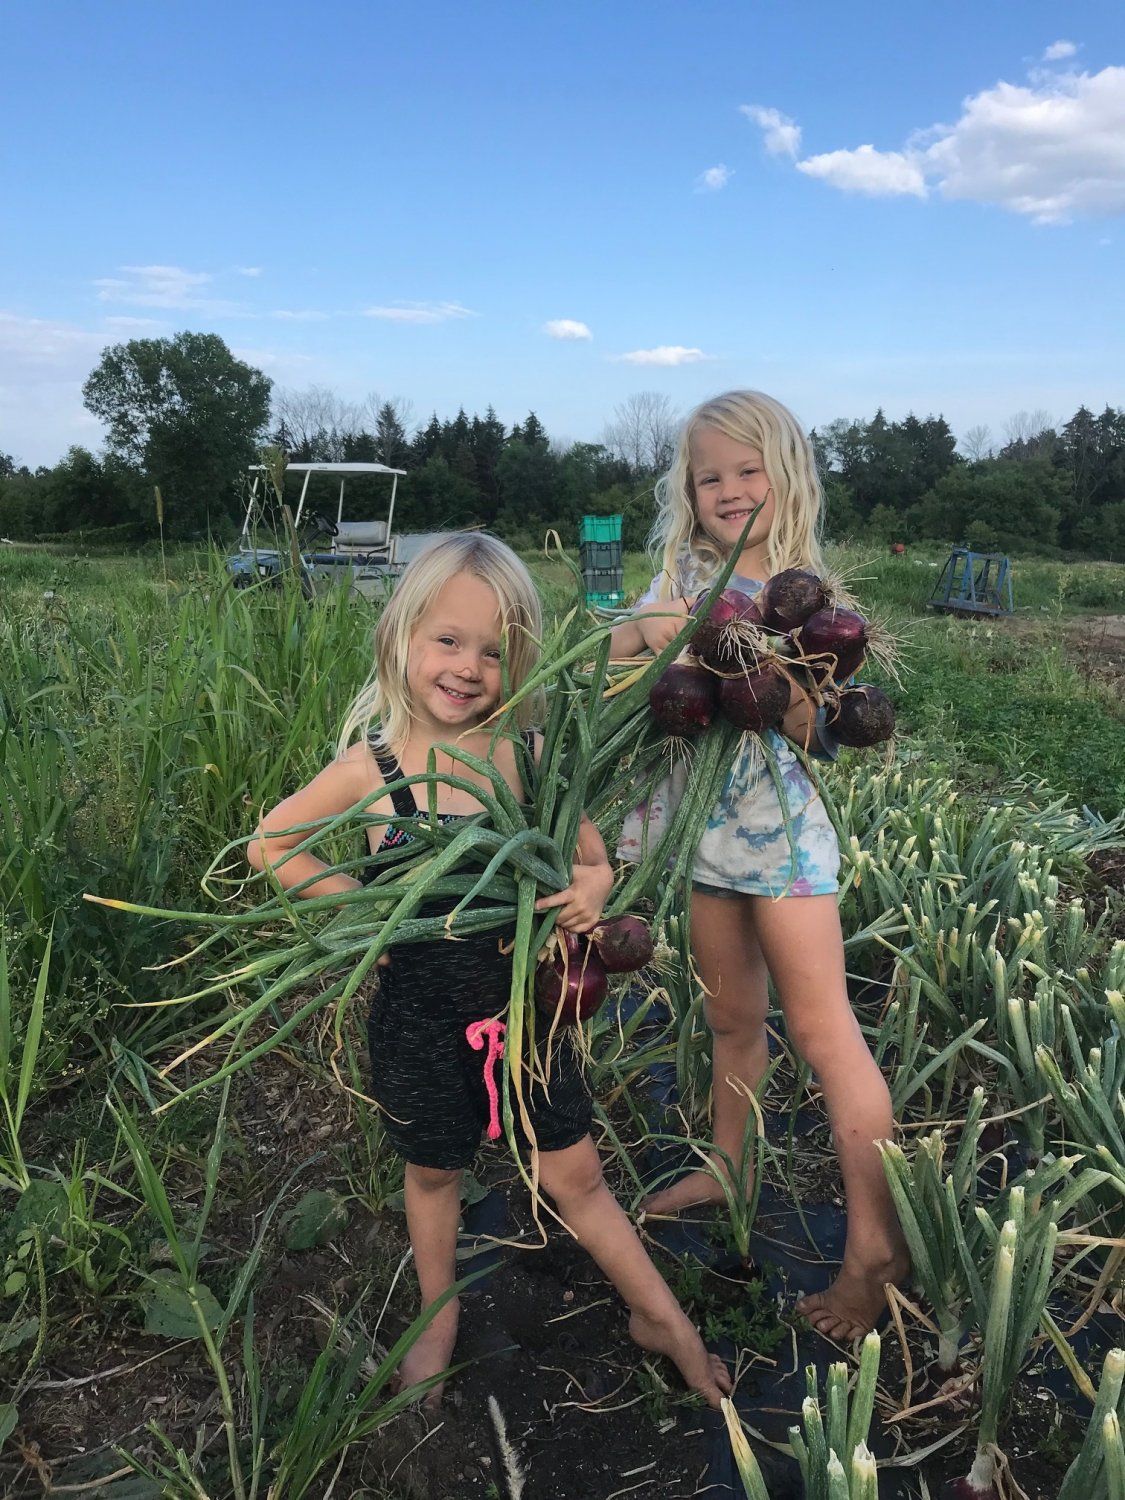 Previous Happening: Farm Happenings for August 11, 2021